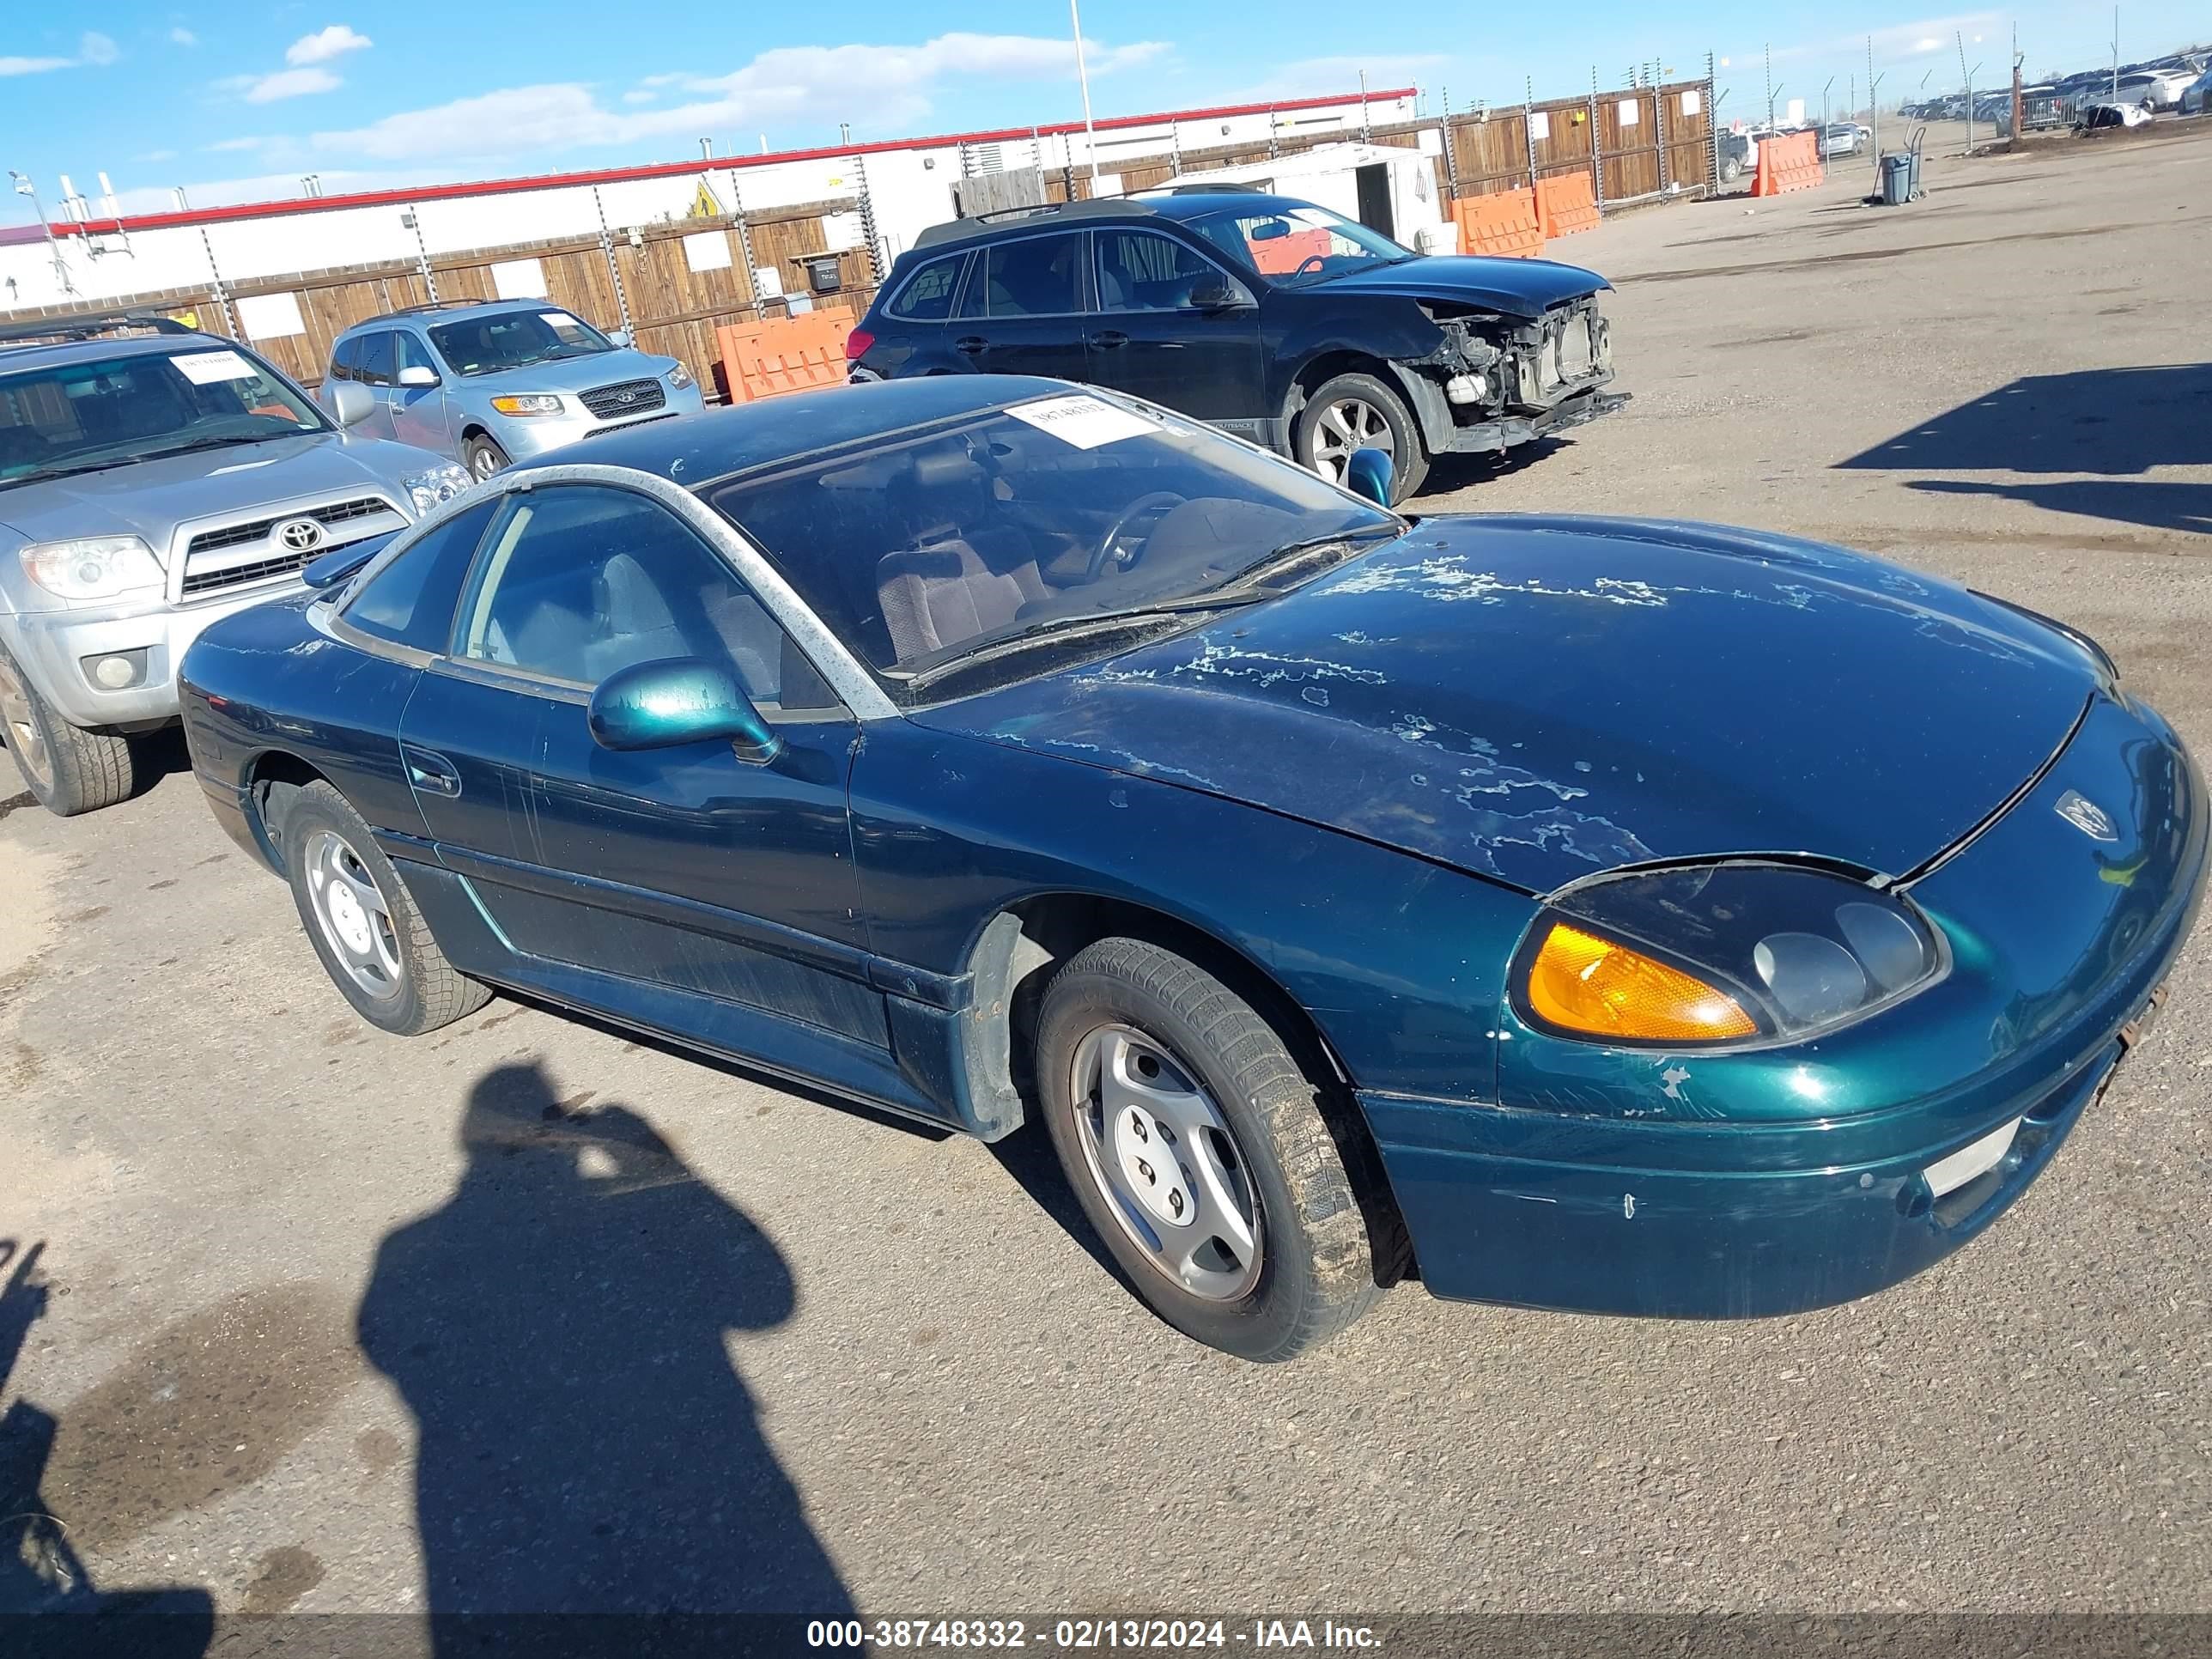 vin: JB3AM44H1SY031859 JB3AM44H1SY031859 1995 dodge stealth 3000 for Sale in 80022, 8510 Brighton Rd., Commerce City, Colorado, USA